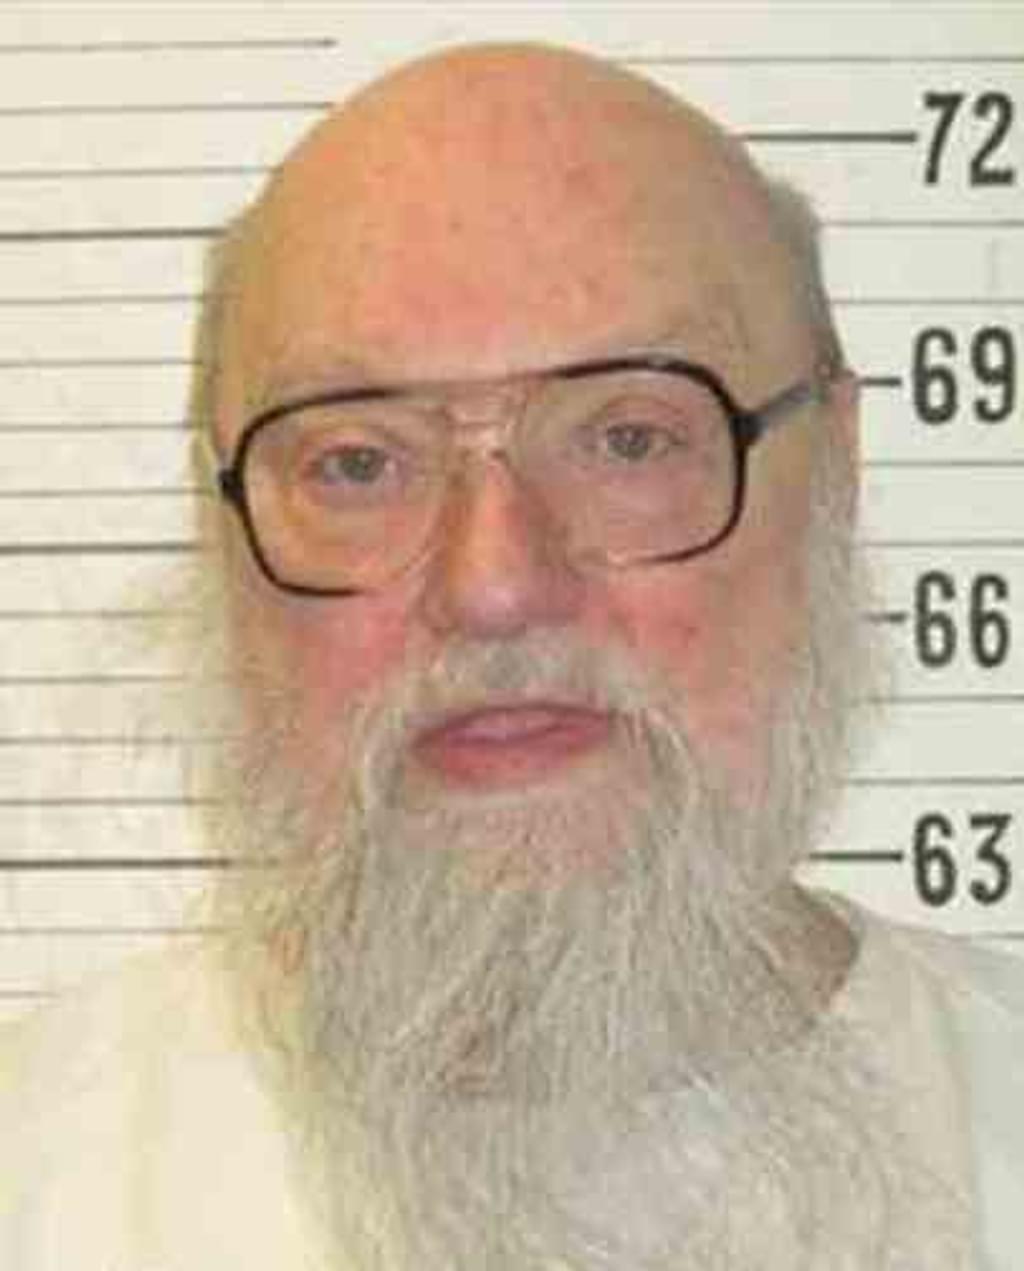 Tennessee Trial Court Denies Motion to Halt Upcoming Execution Based on New DNA Evidence